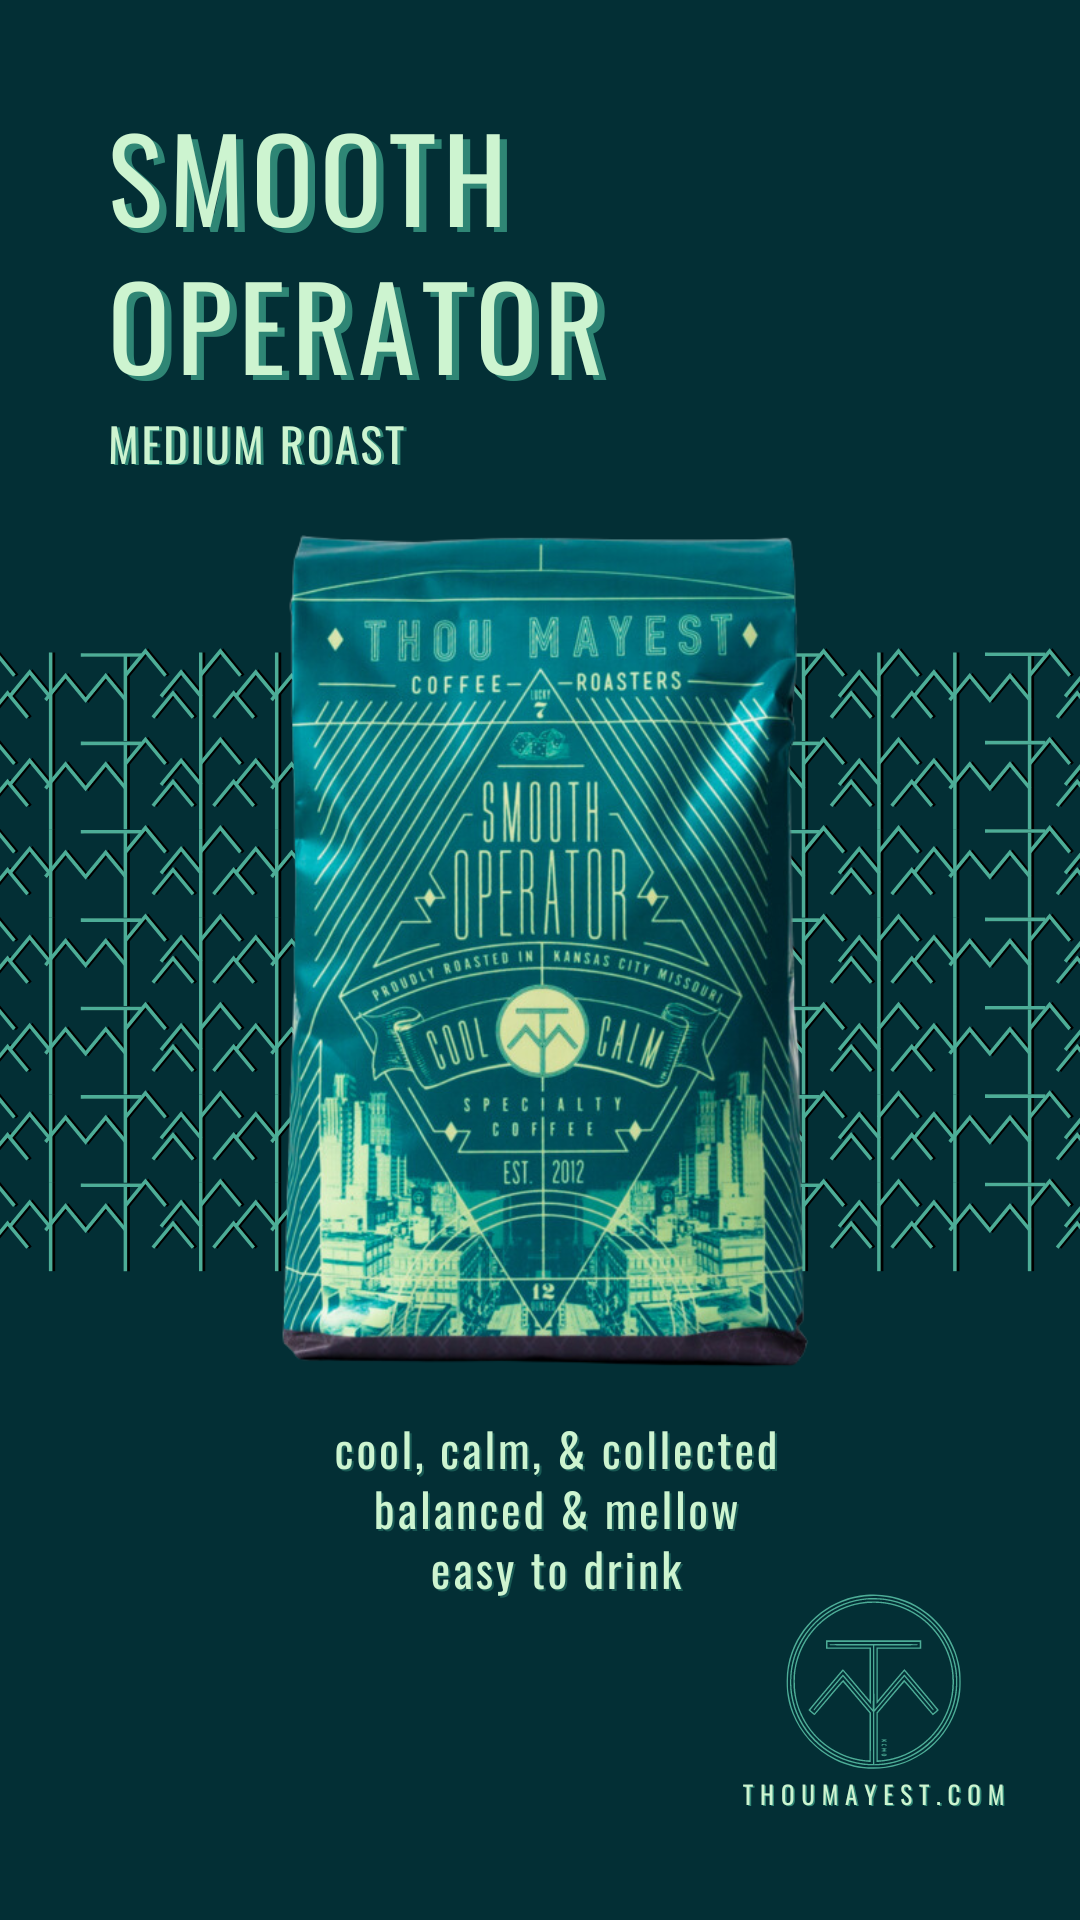 Image of Smooth Operator 12oz bag of coffee with description: Medium roast. Cool, calm, & collected. Balanced & mellow. Easy to drink.